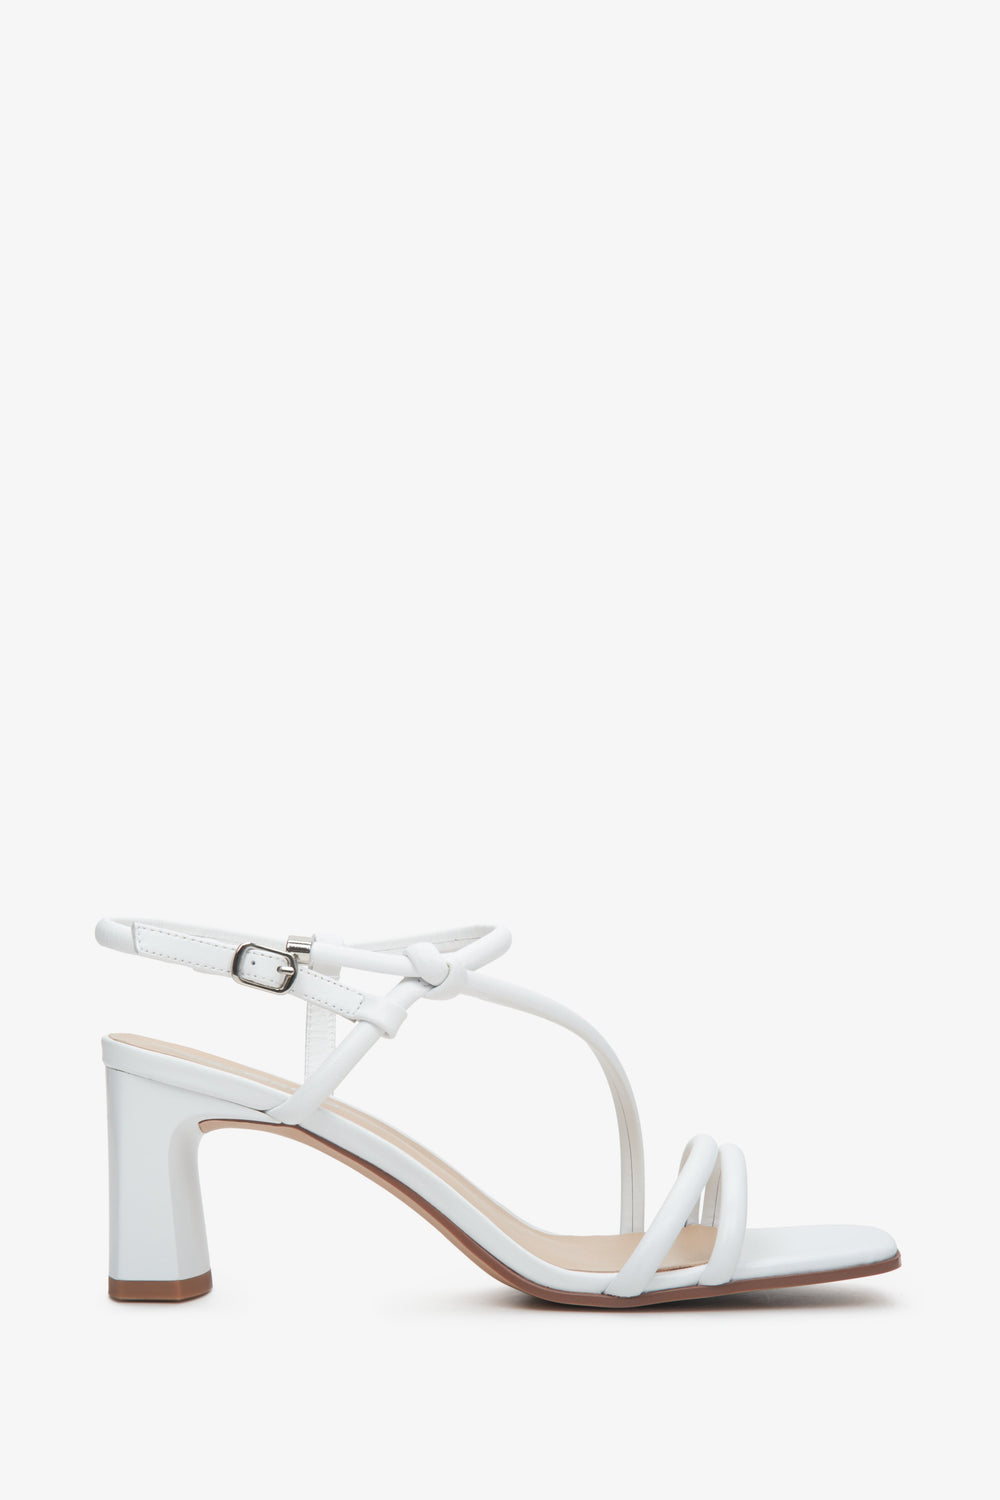 White leather women's sandals with a stable heel Estro ER00113378.